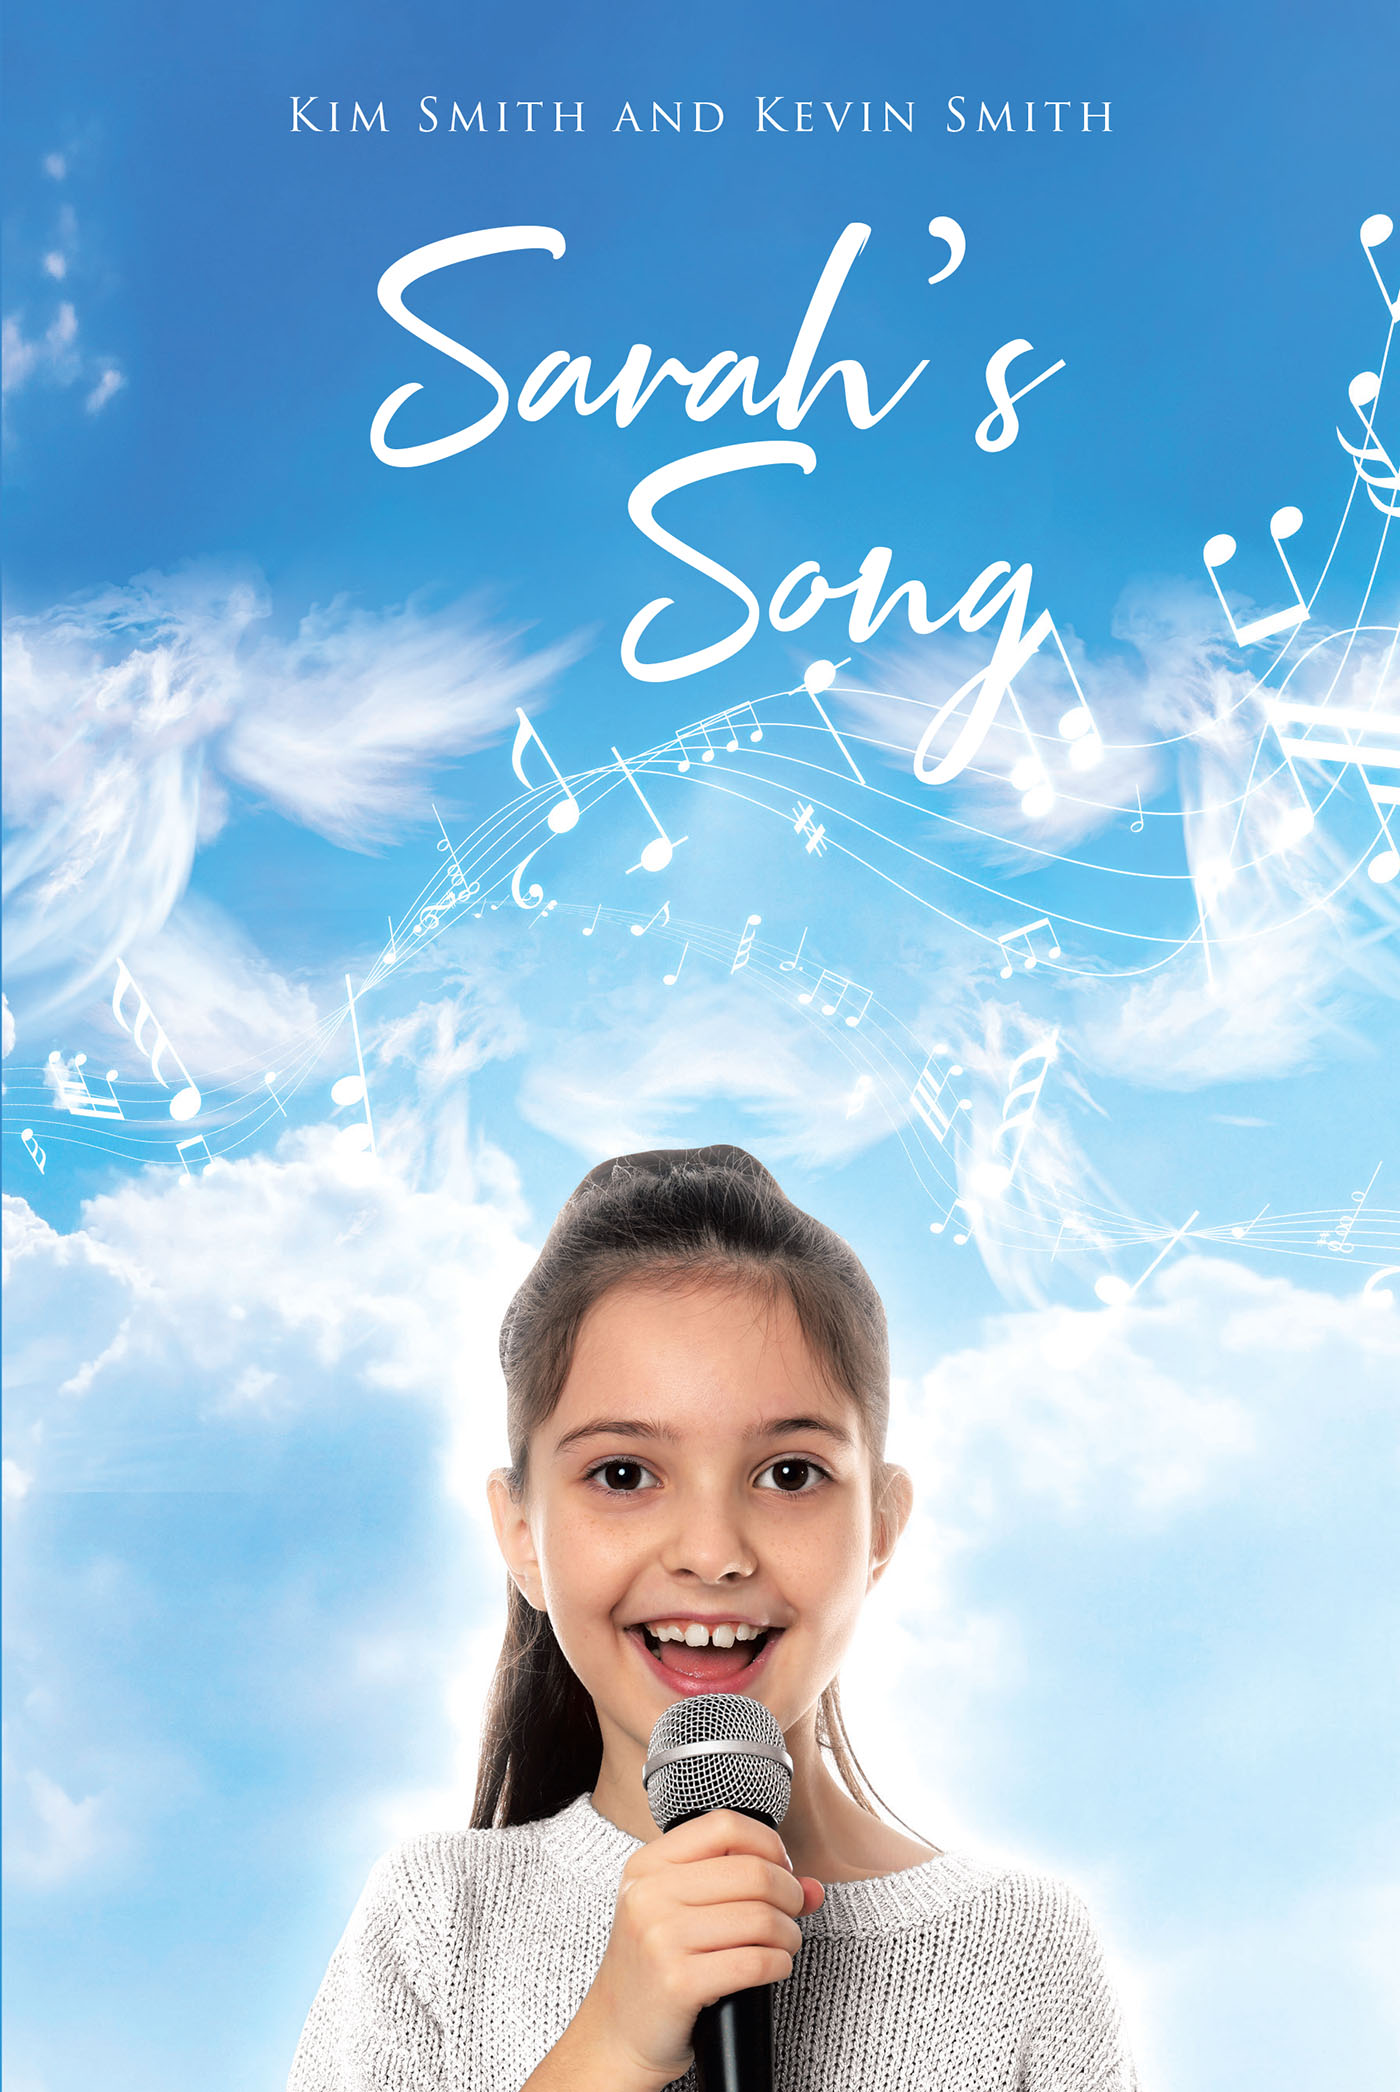 Authors Kim Smith and Kevin Smith’s New Book, "Sarah’s Song," Takes Readers Into an Ultimate Battle Between Good and Evil Amid the Search for the Thirteenth Scroll